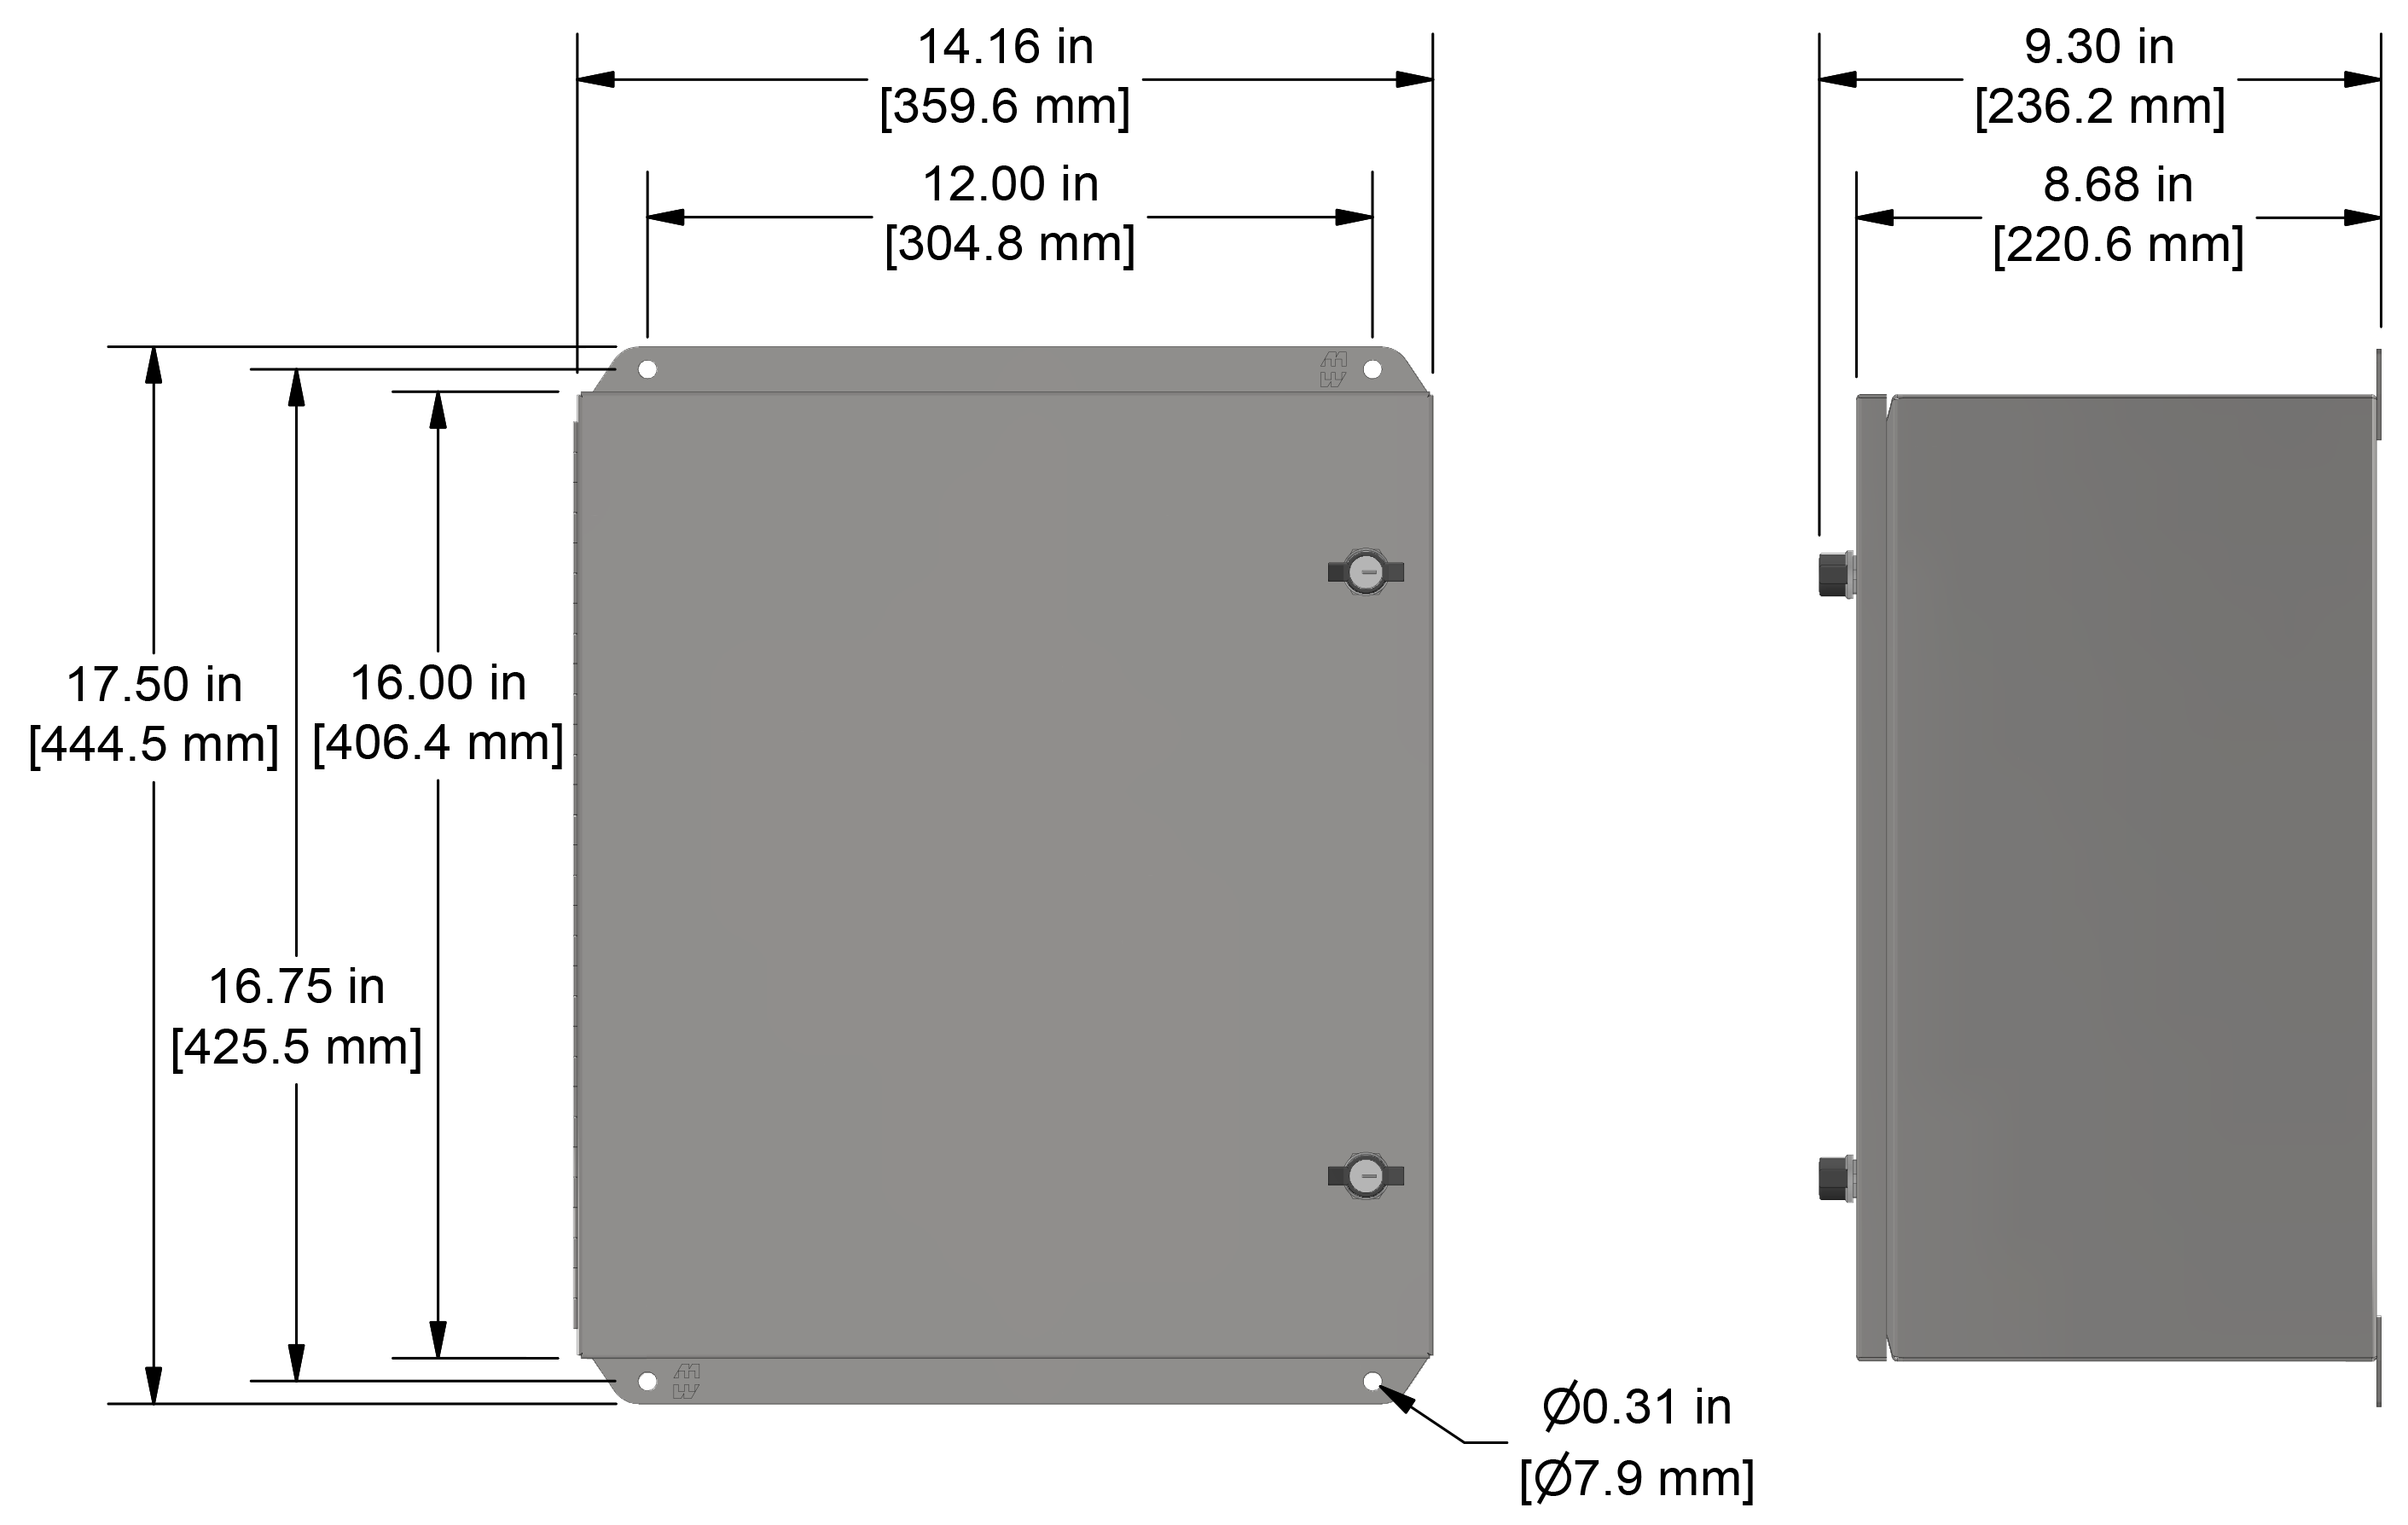 A drawing showing the dimensions of a CTC MX433 Extended Capacity industrial enclosure.